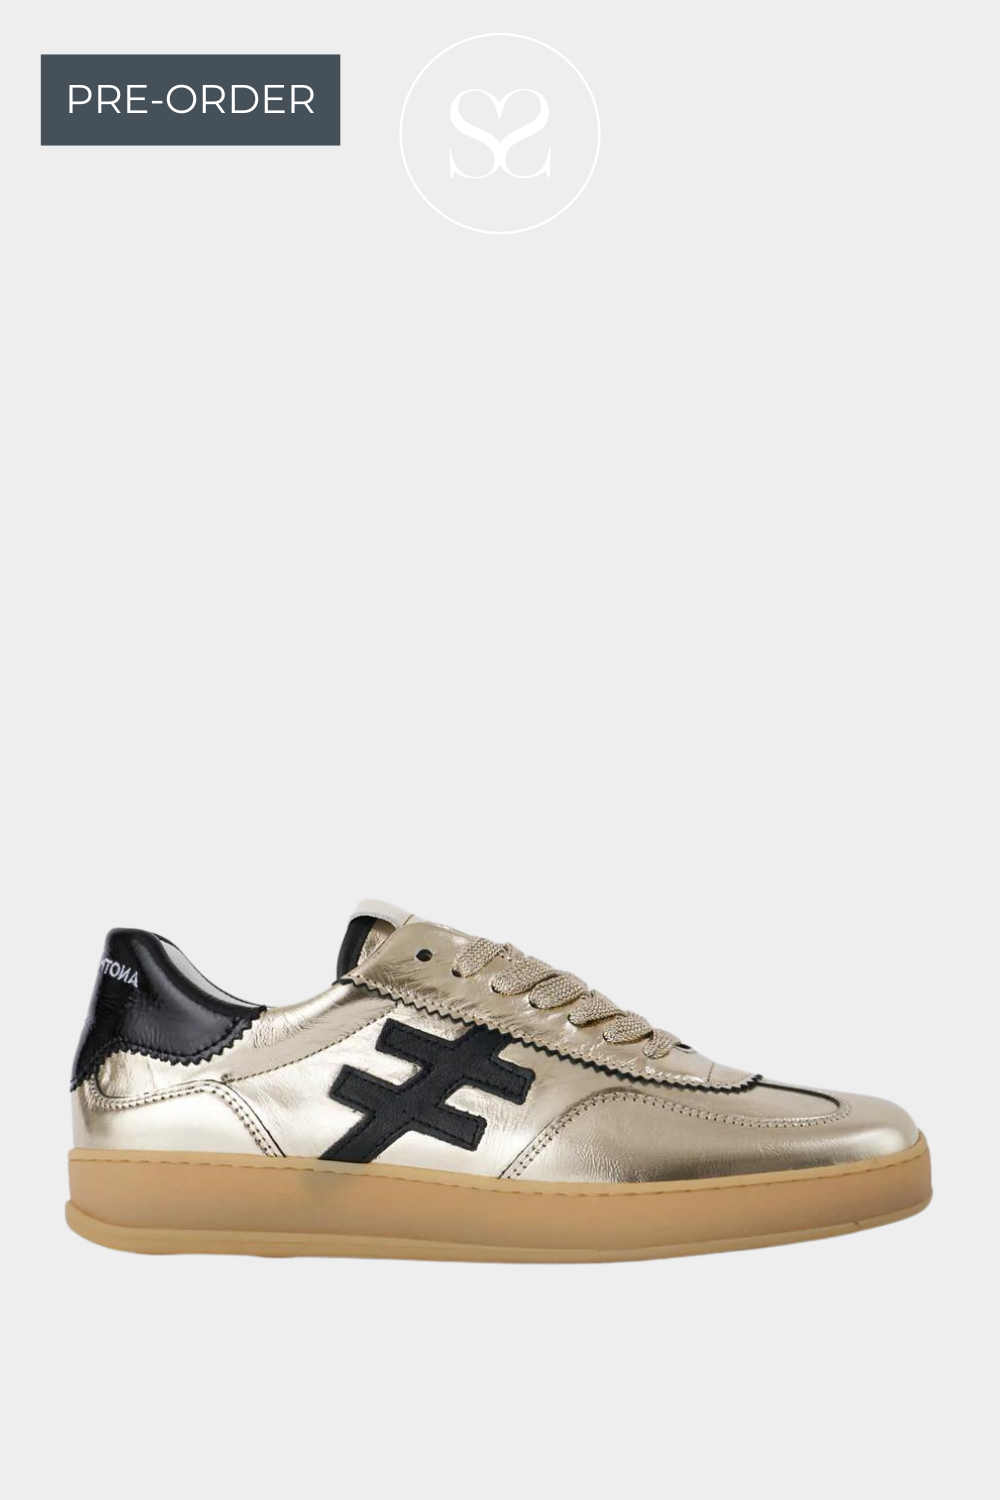 ANOTHER TREND ICONIC GOLD AND BLACK METALLIC LEATHER TRAINER